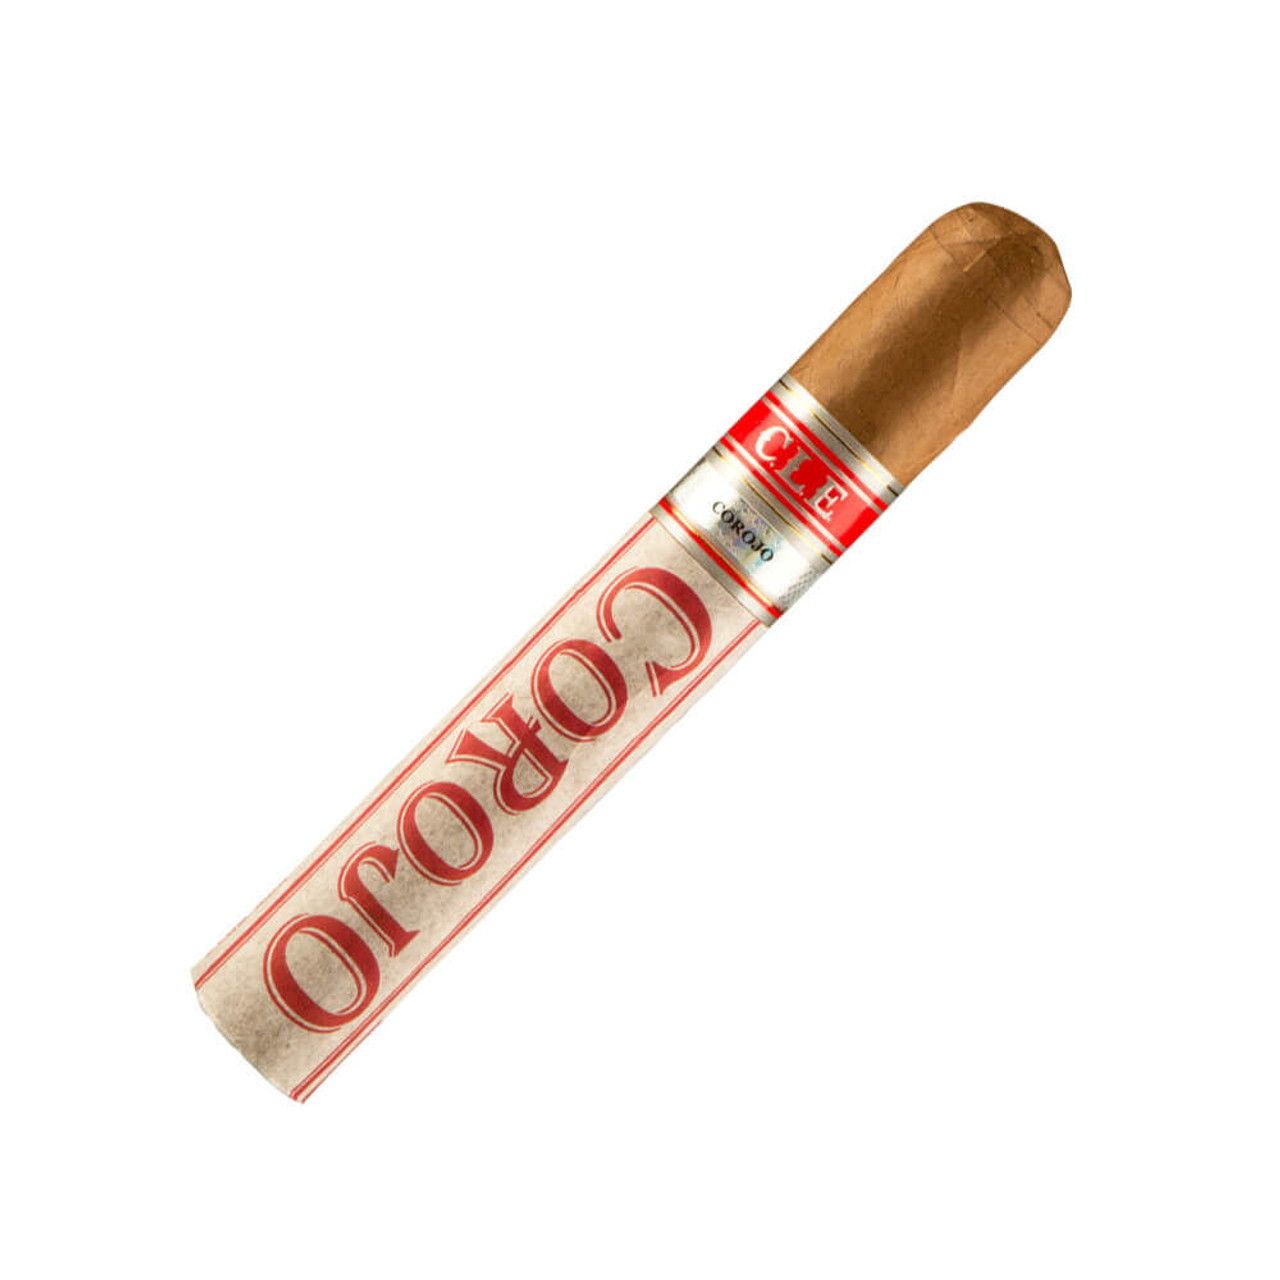 CLE Corojo 6 X 60 Cigars - 6 x 60 (Pack of 5)